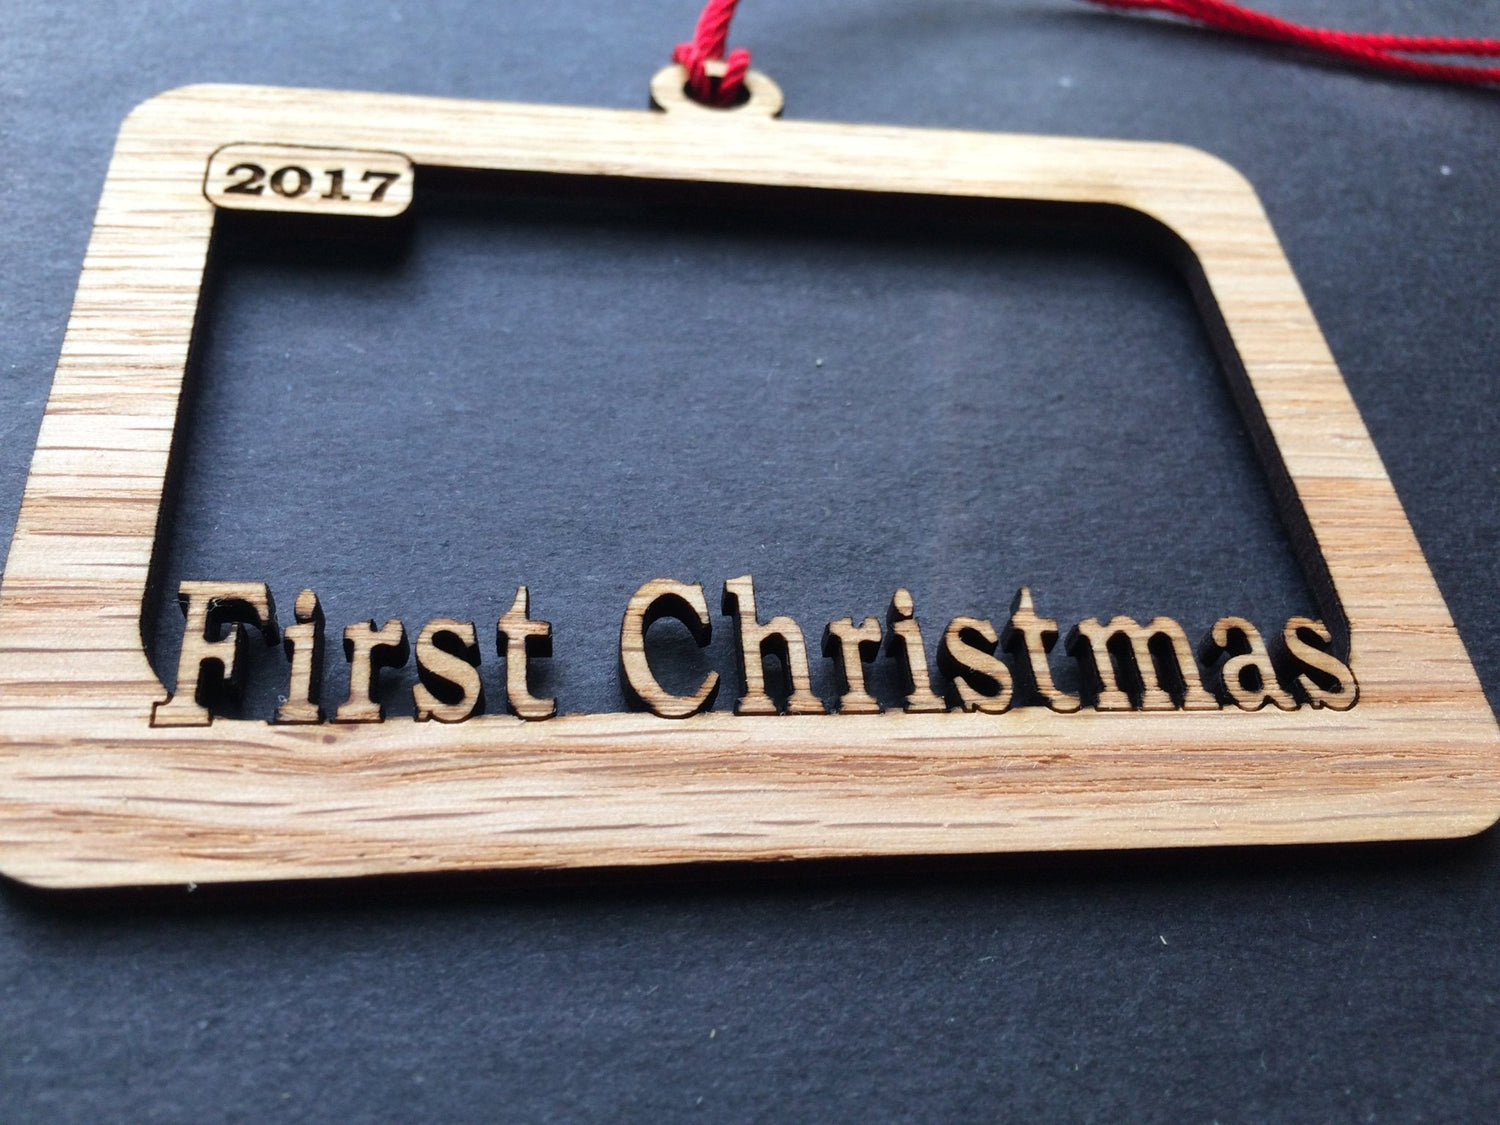 Christmas 2024 Ornament - Christmas 2024 Ornament - 2018 My First Christmas Ornament, Ornament, home decor, laser engraved - Legacy Images - Legacy Images - Holiday Ornaments - Legacy Images - Holiday Ornaments